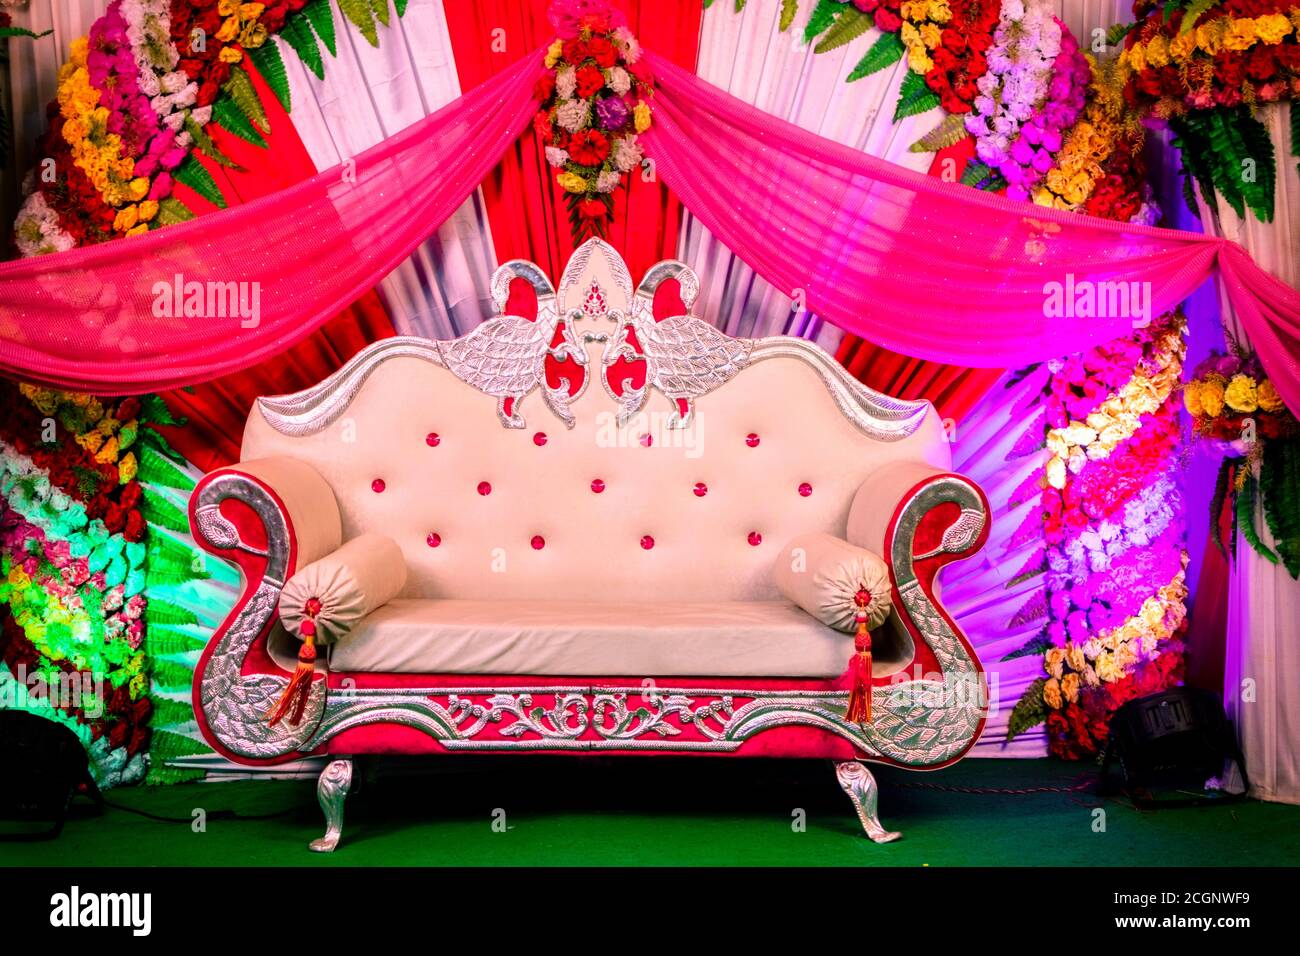 Amazing 300+ Wedding Stage Background Hd Ideas and Designs